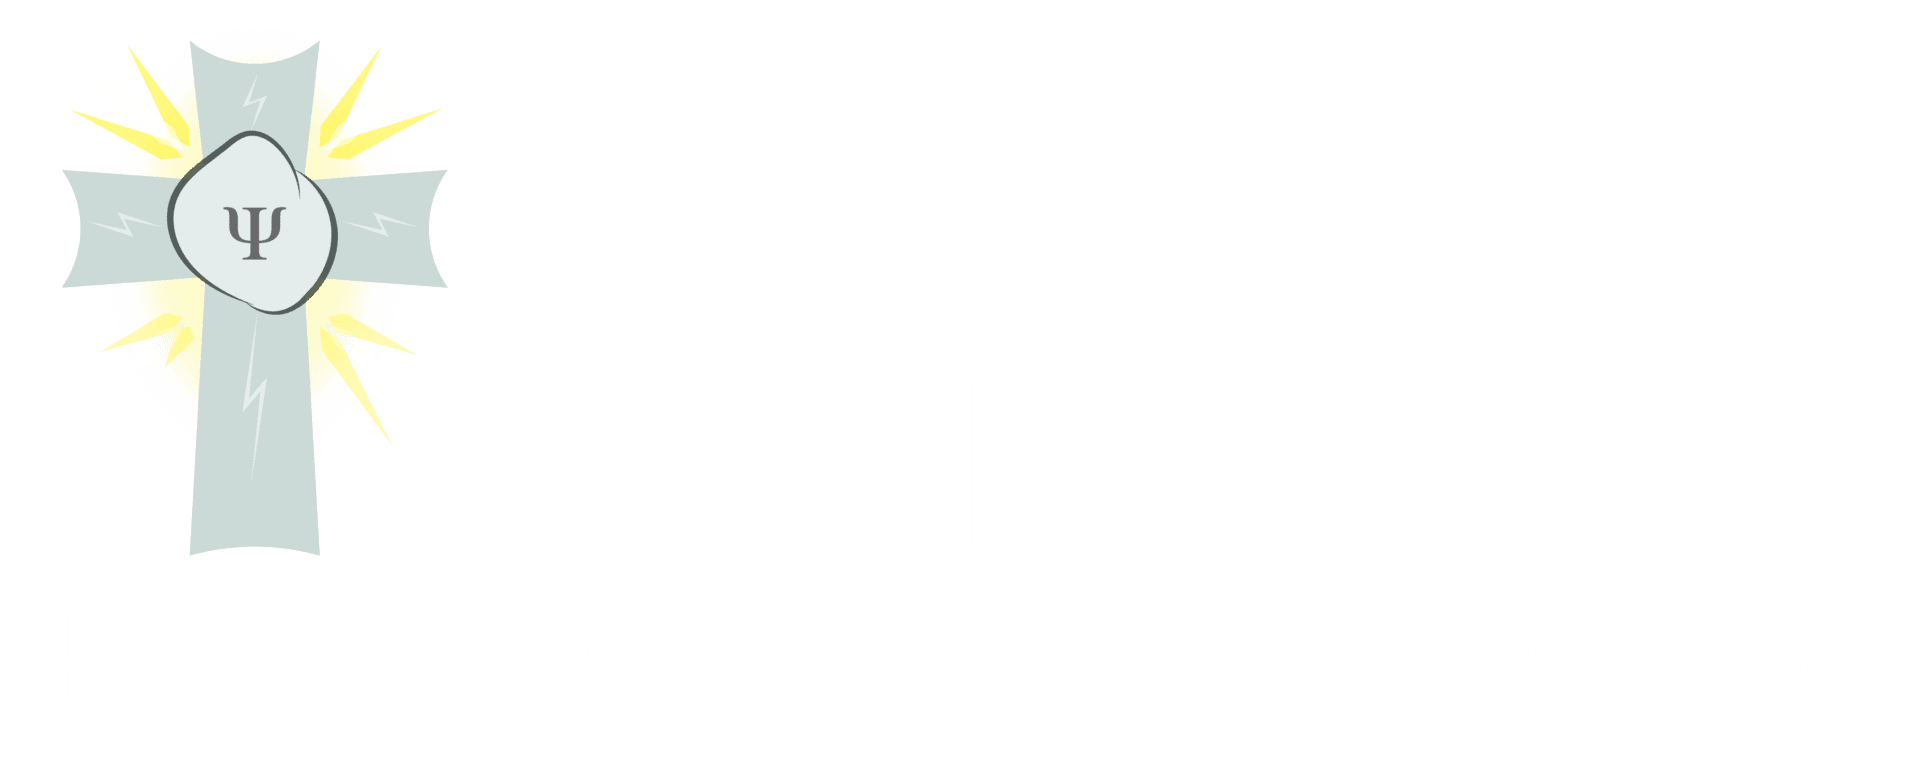 A green background with white letters that say " eudoku foundation."